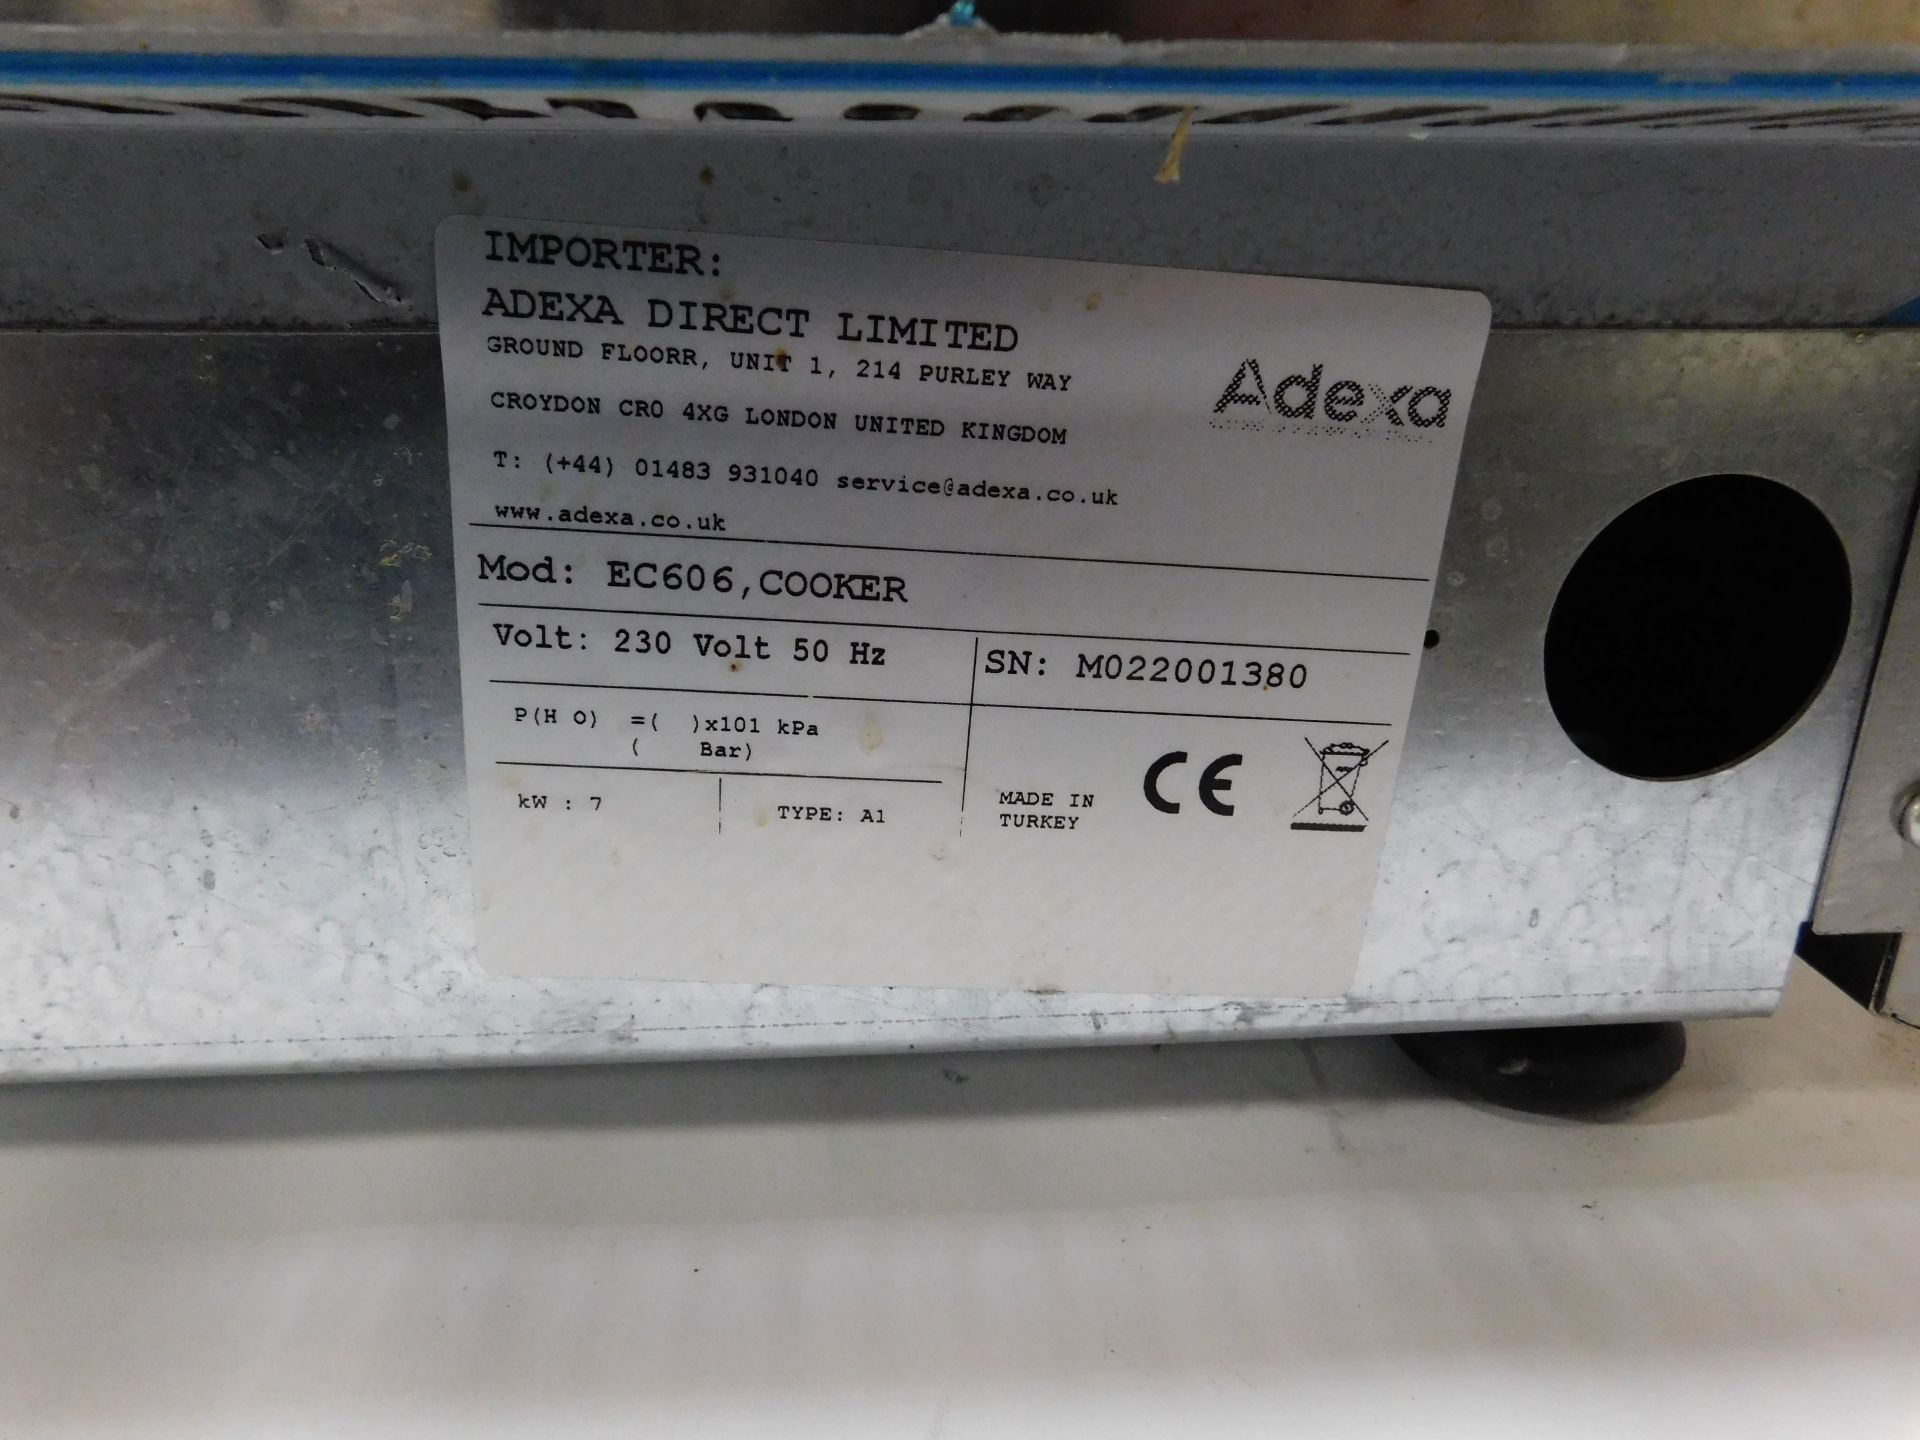 Adexa EC606 Cooker, Serial Number MO22001380 (Location Brentwood. Please Refer to General Notes) - Image 3 of 3